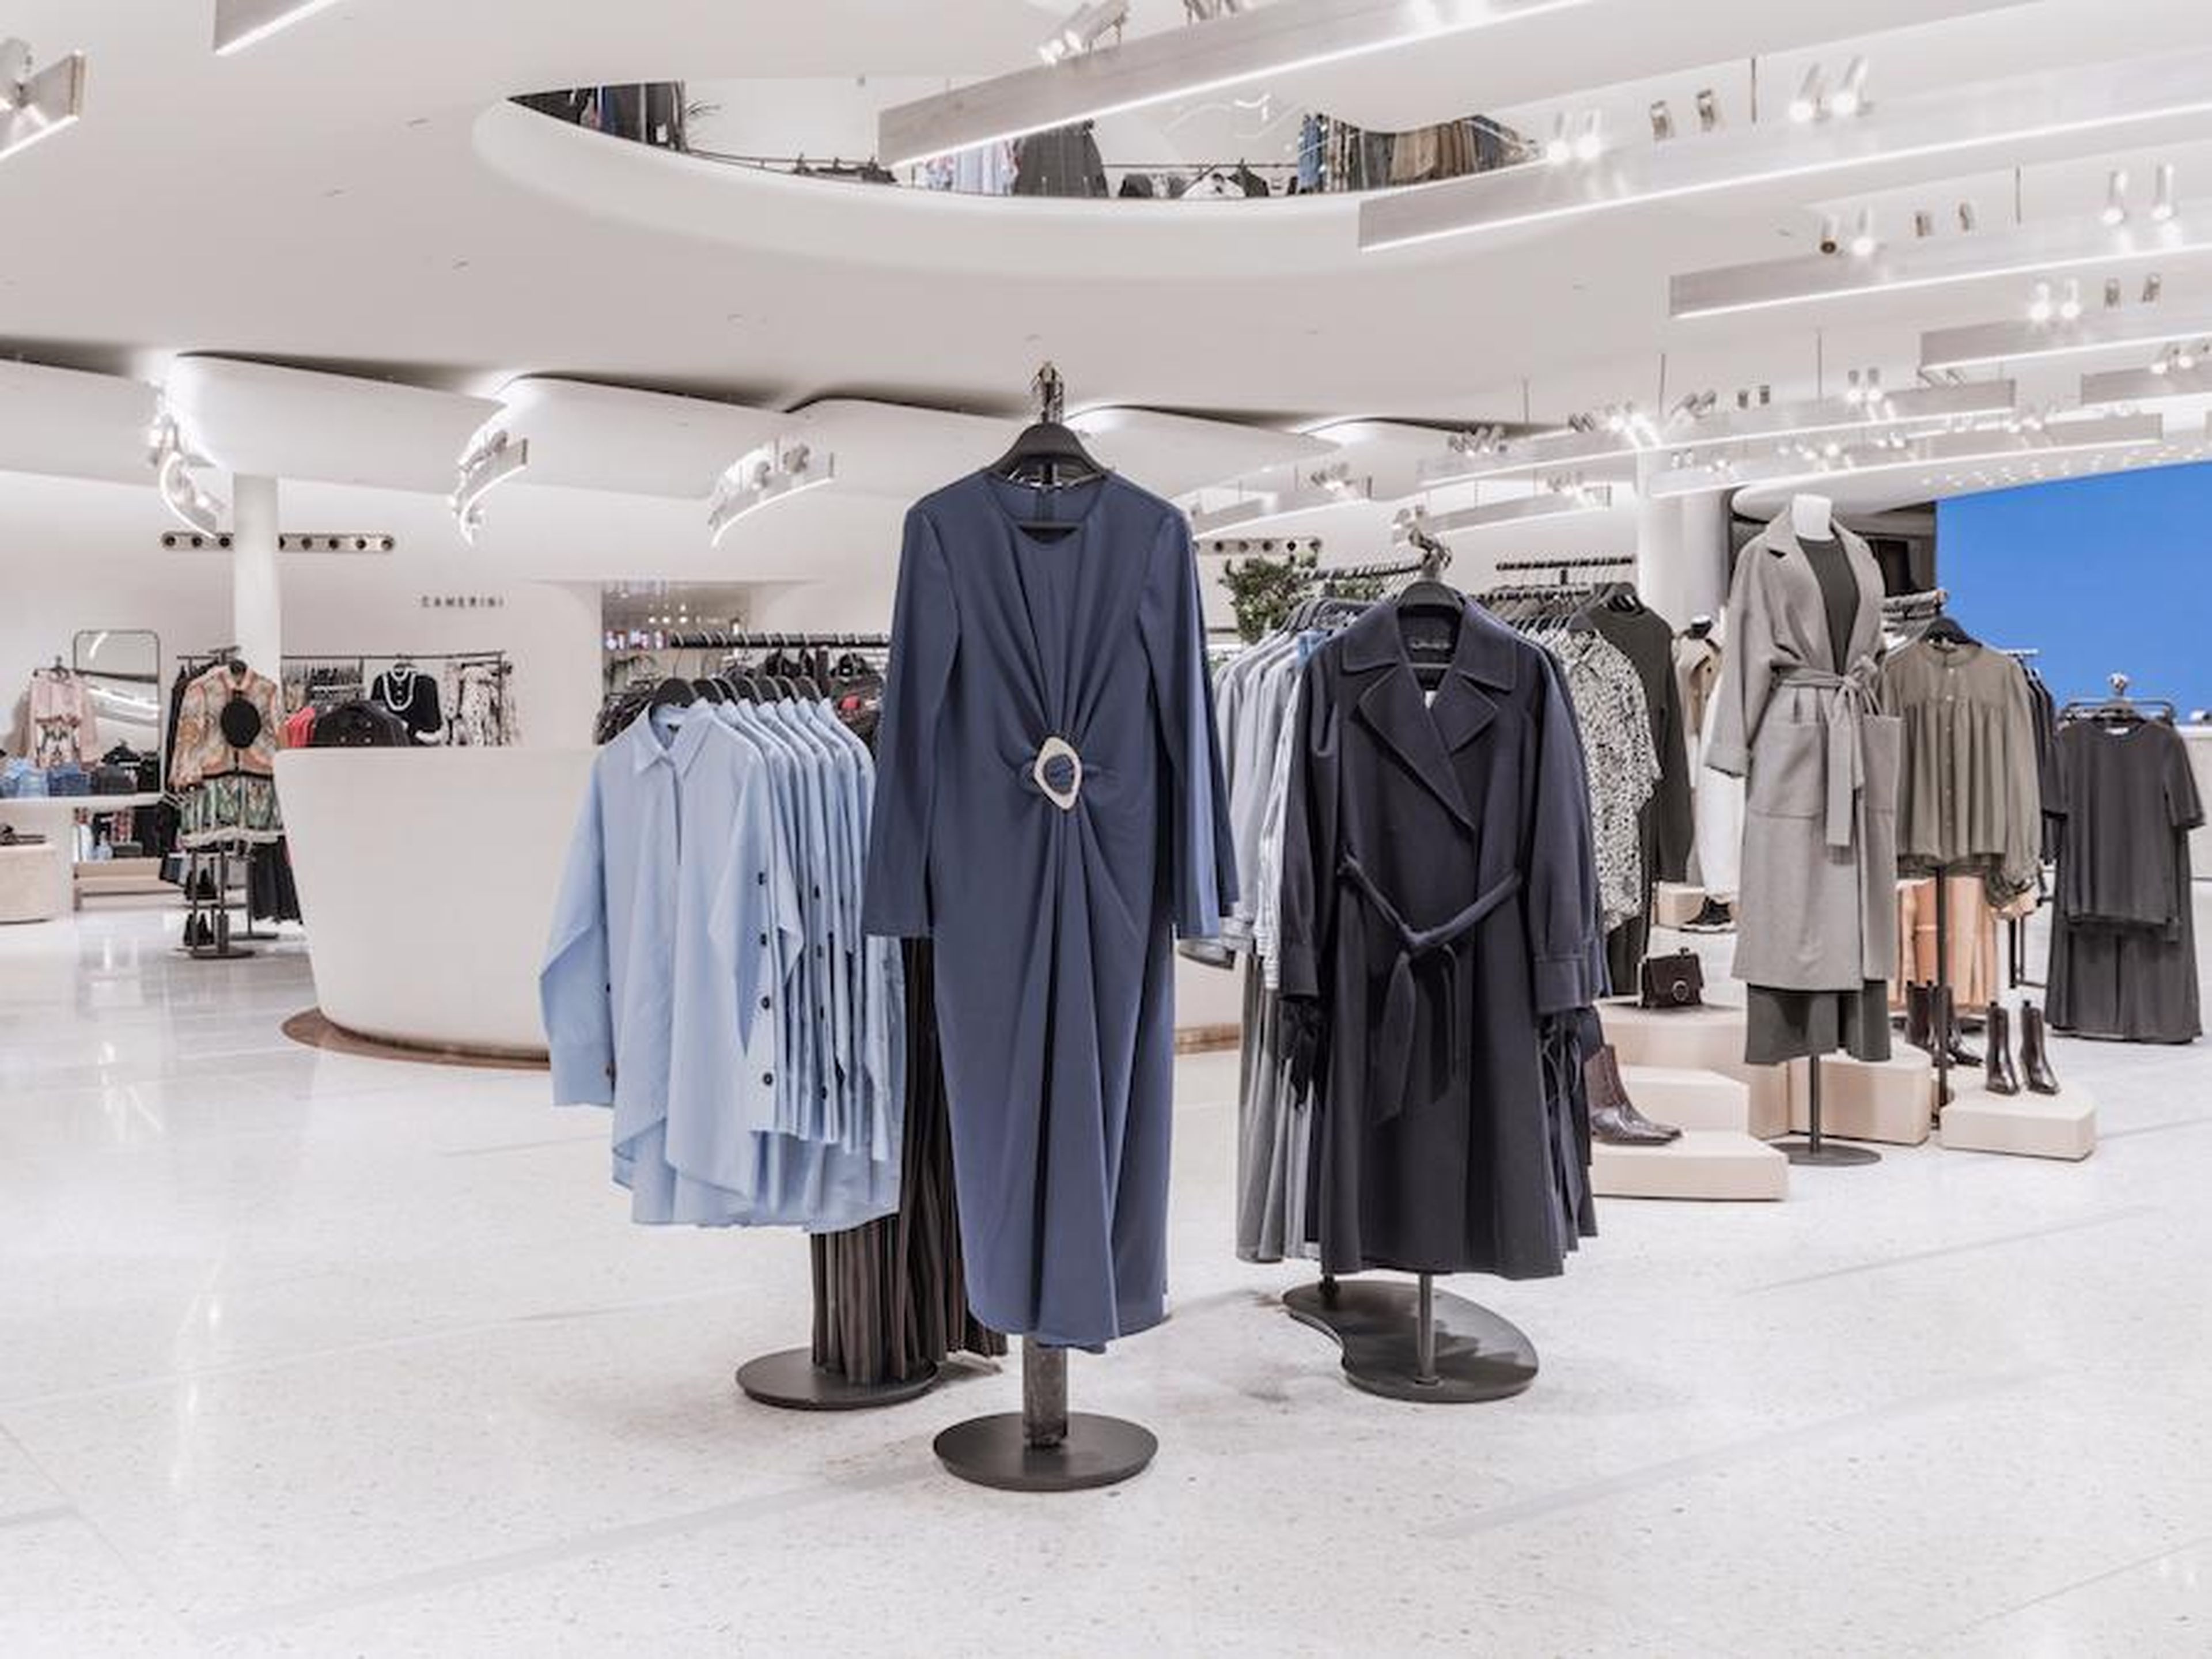 Zara has grown from having one store in La Coruña to 2,238 locations in 96 countries around the world. This photograph shows the womenswear display at a Zara store in Milan.